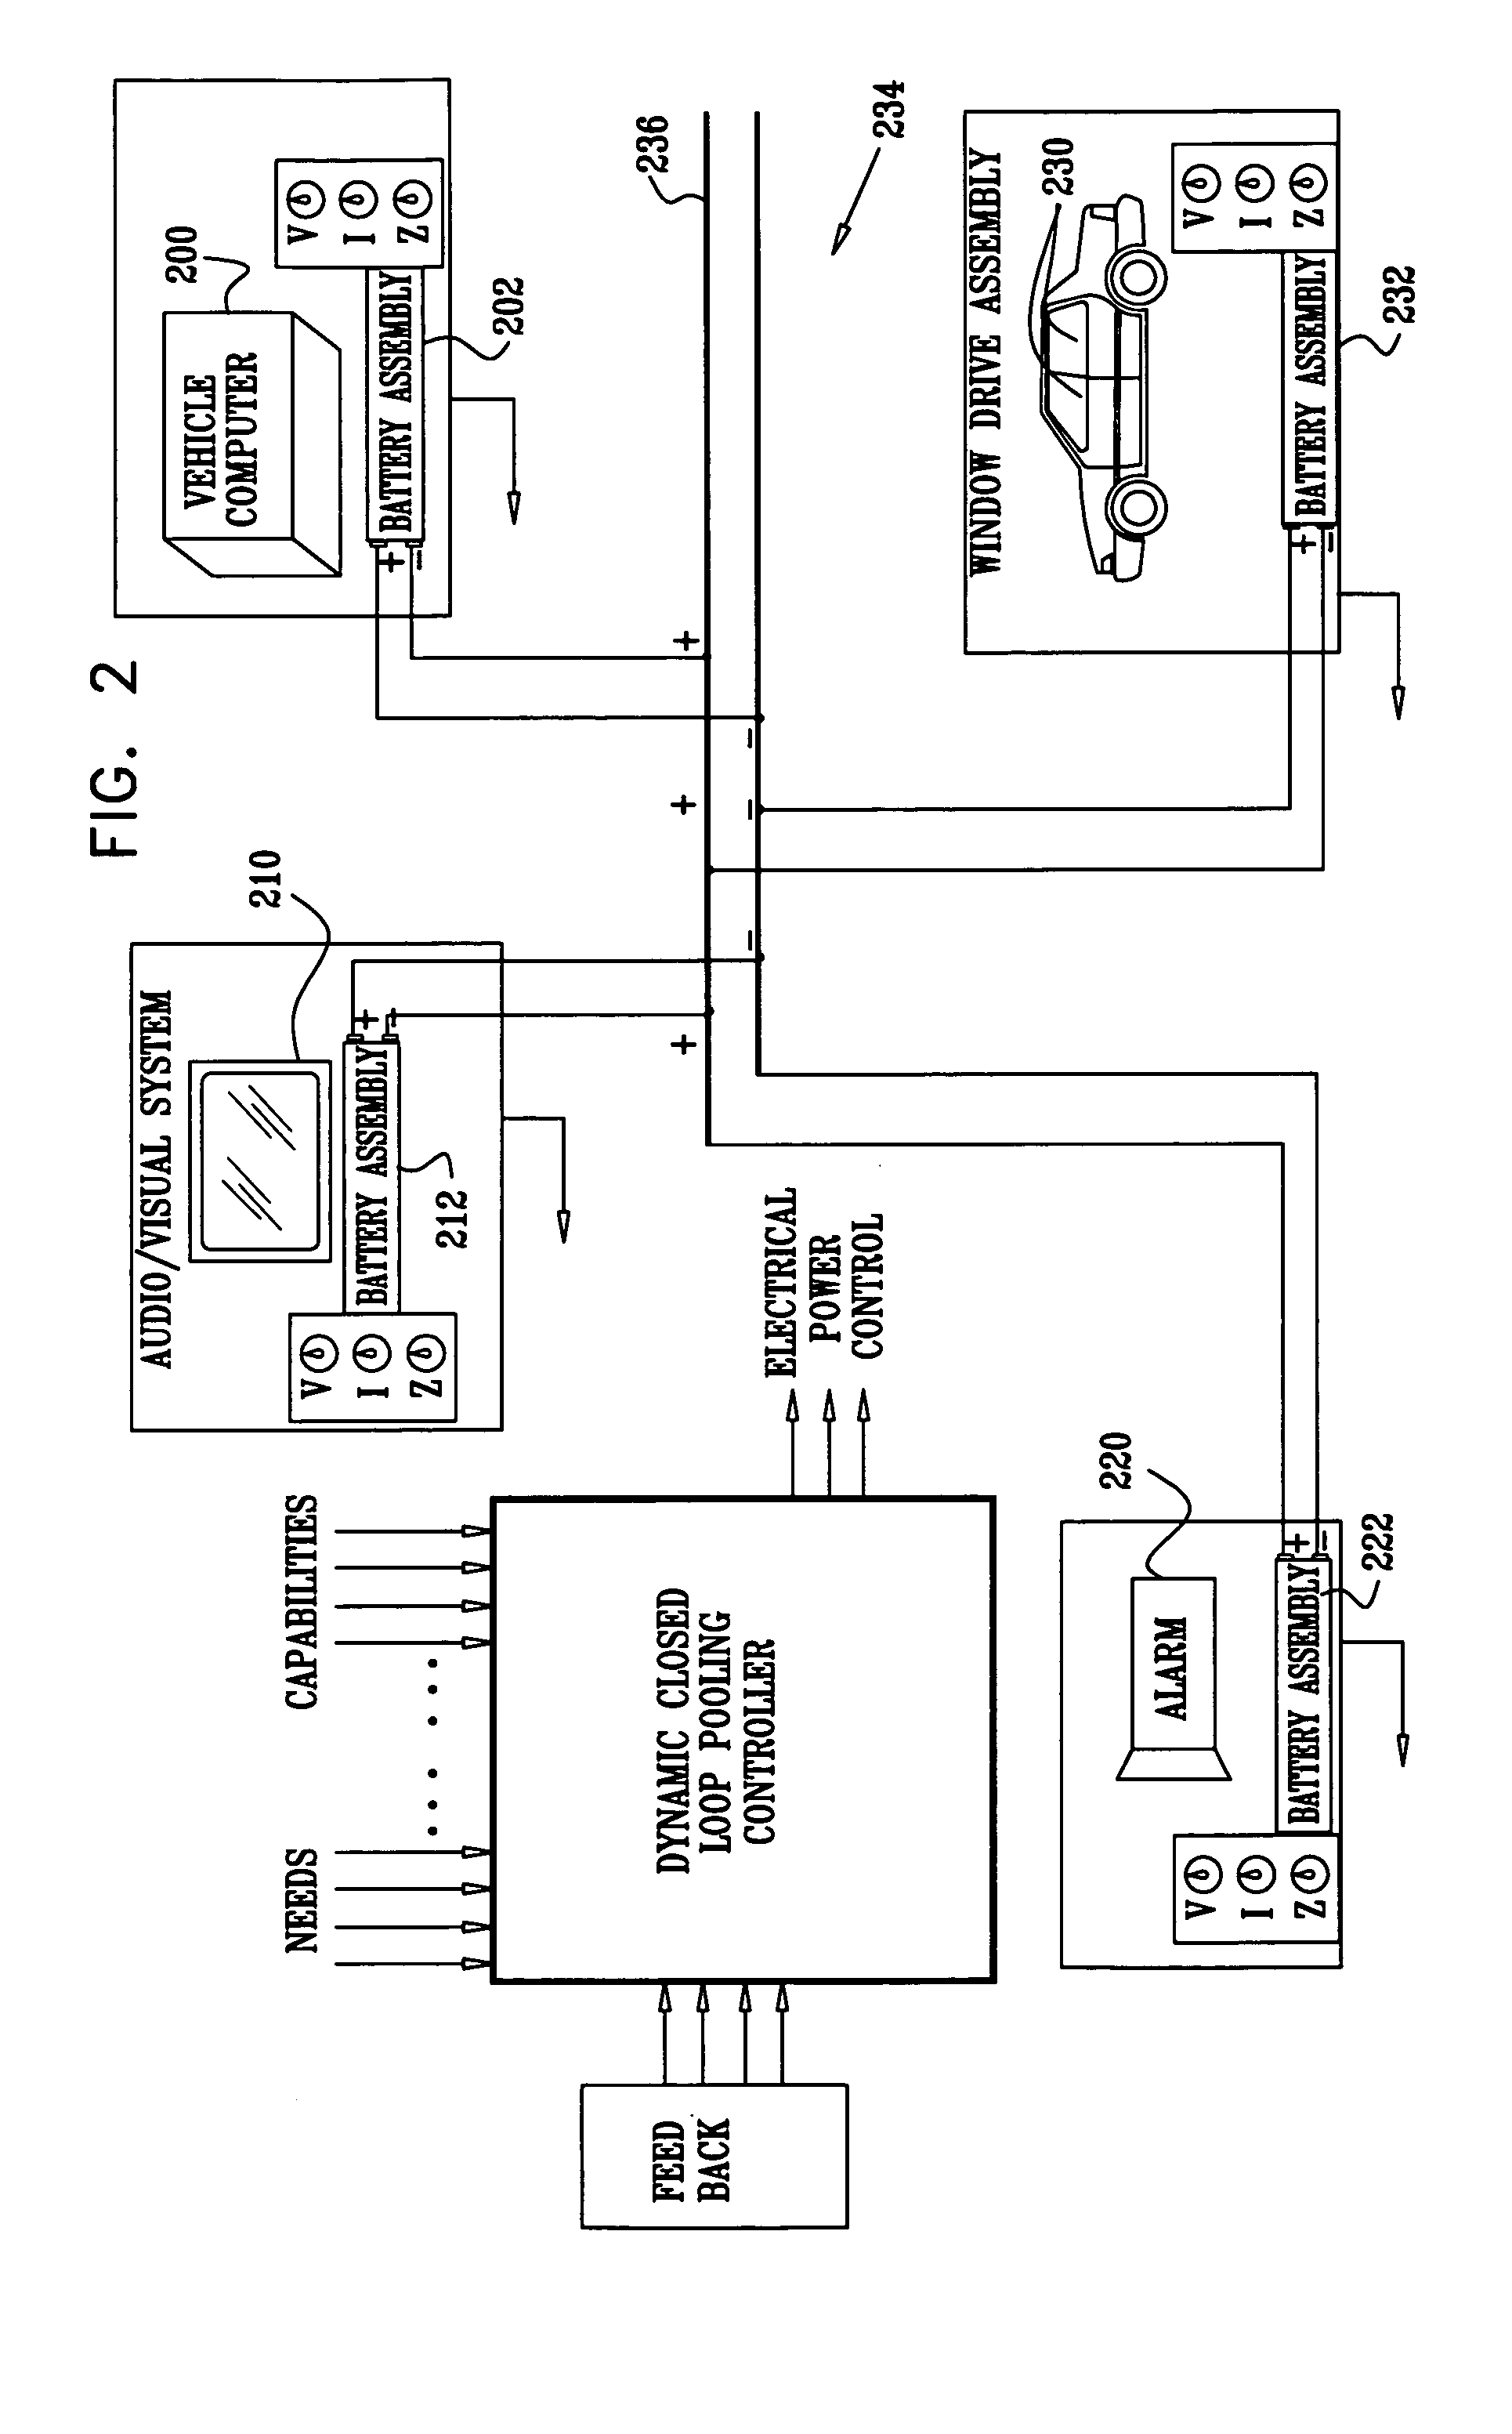 Supply interface unit for direct current power pooling